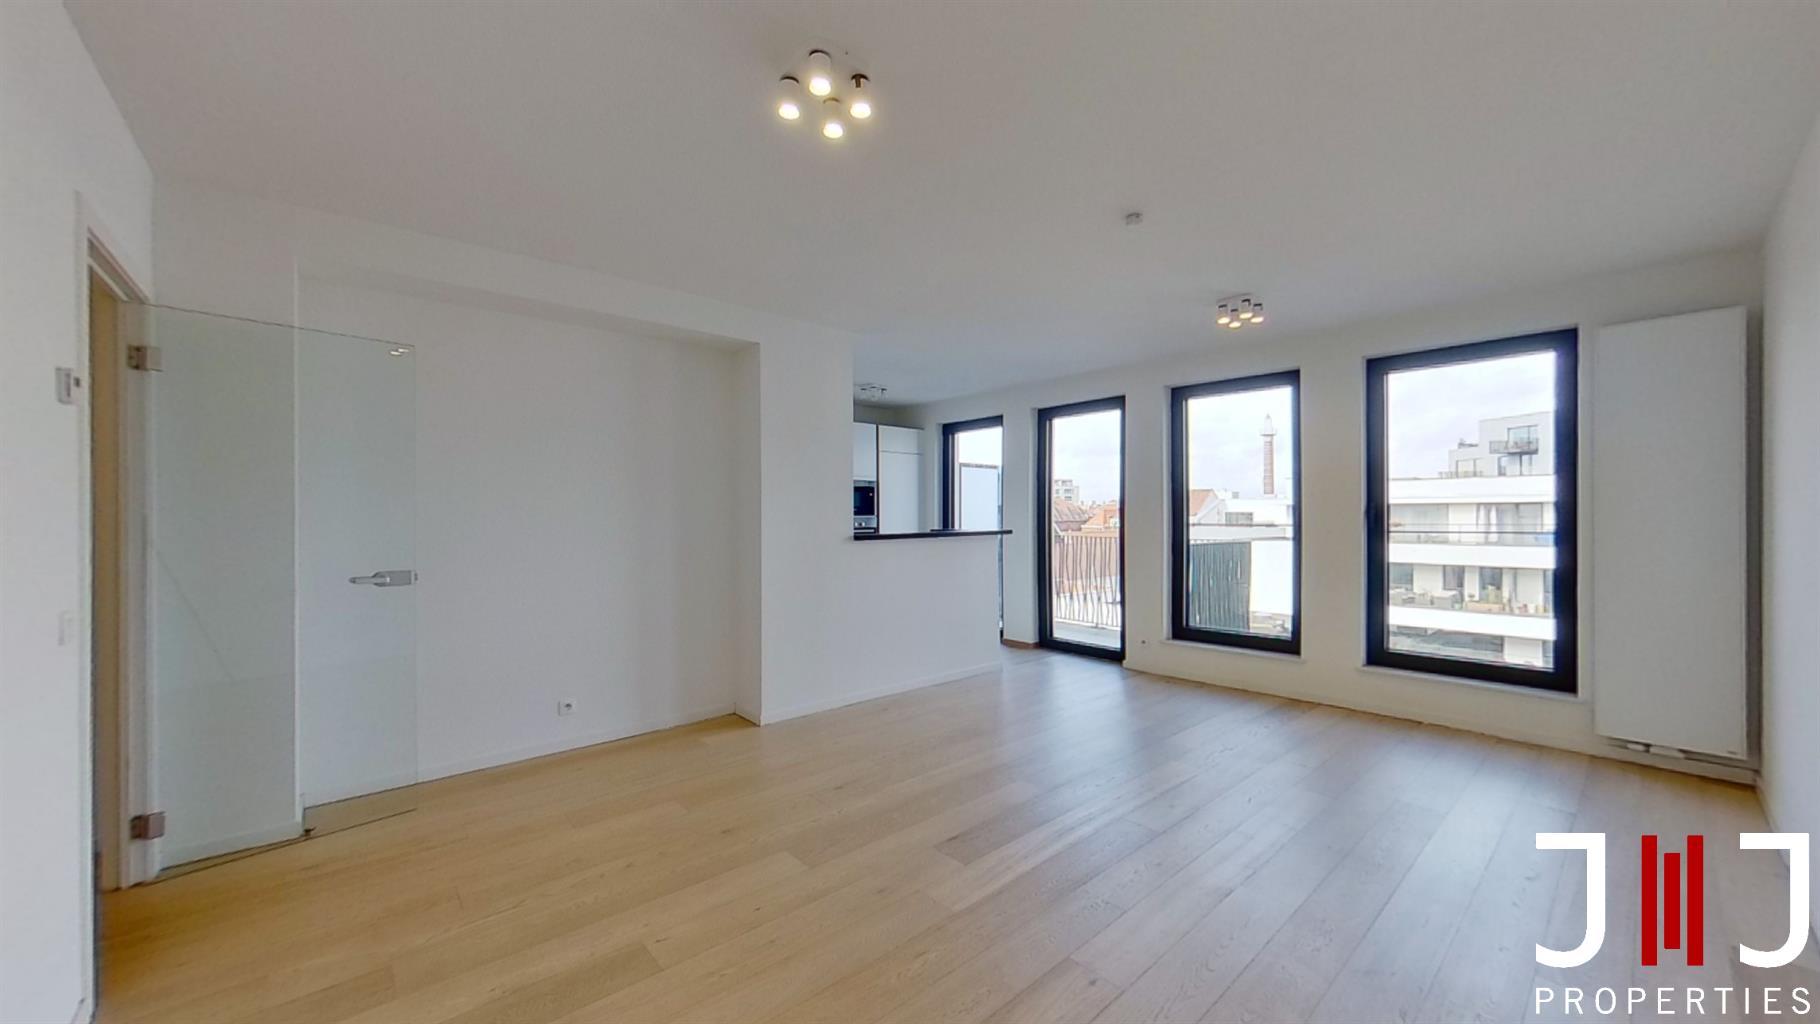 Flat for rent in Brussels